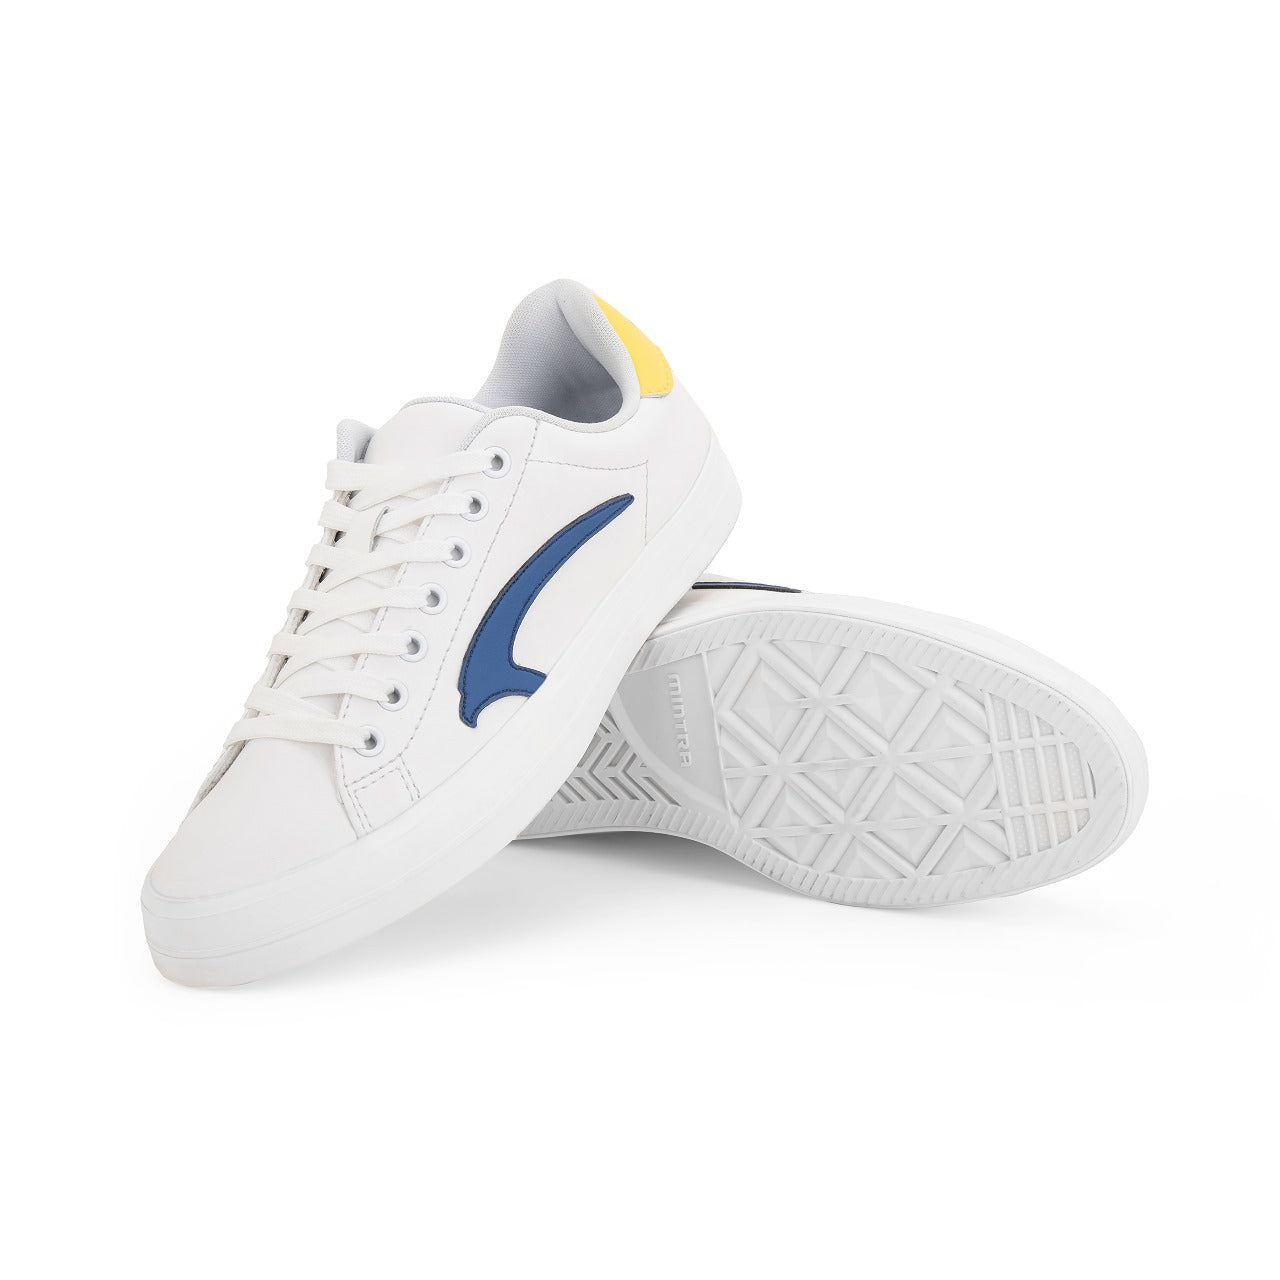 Mintra Urban Shoes For Men, White & Navy